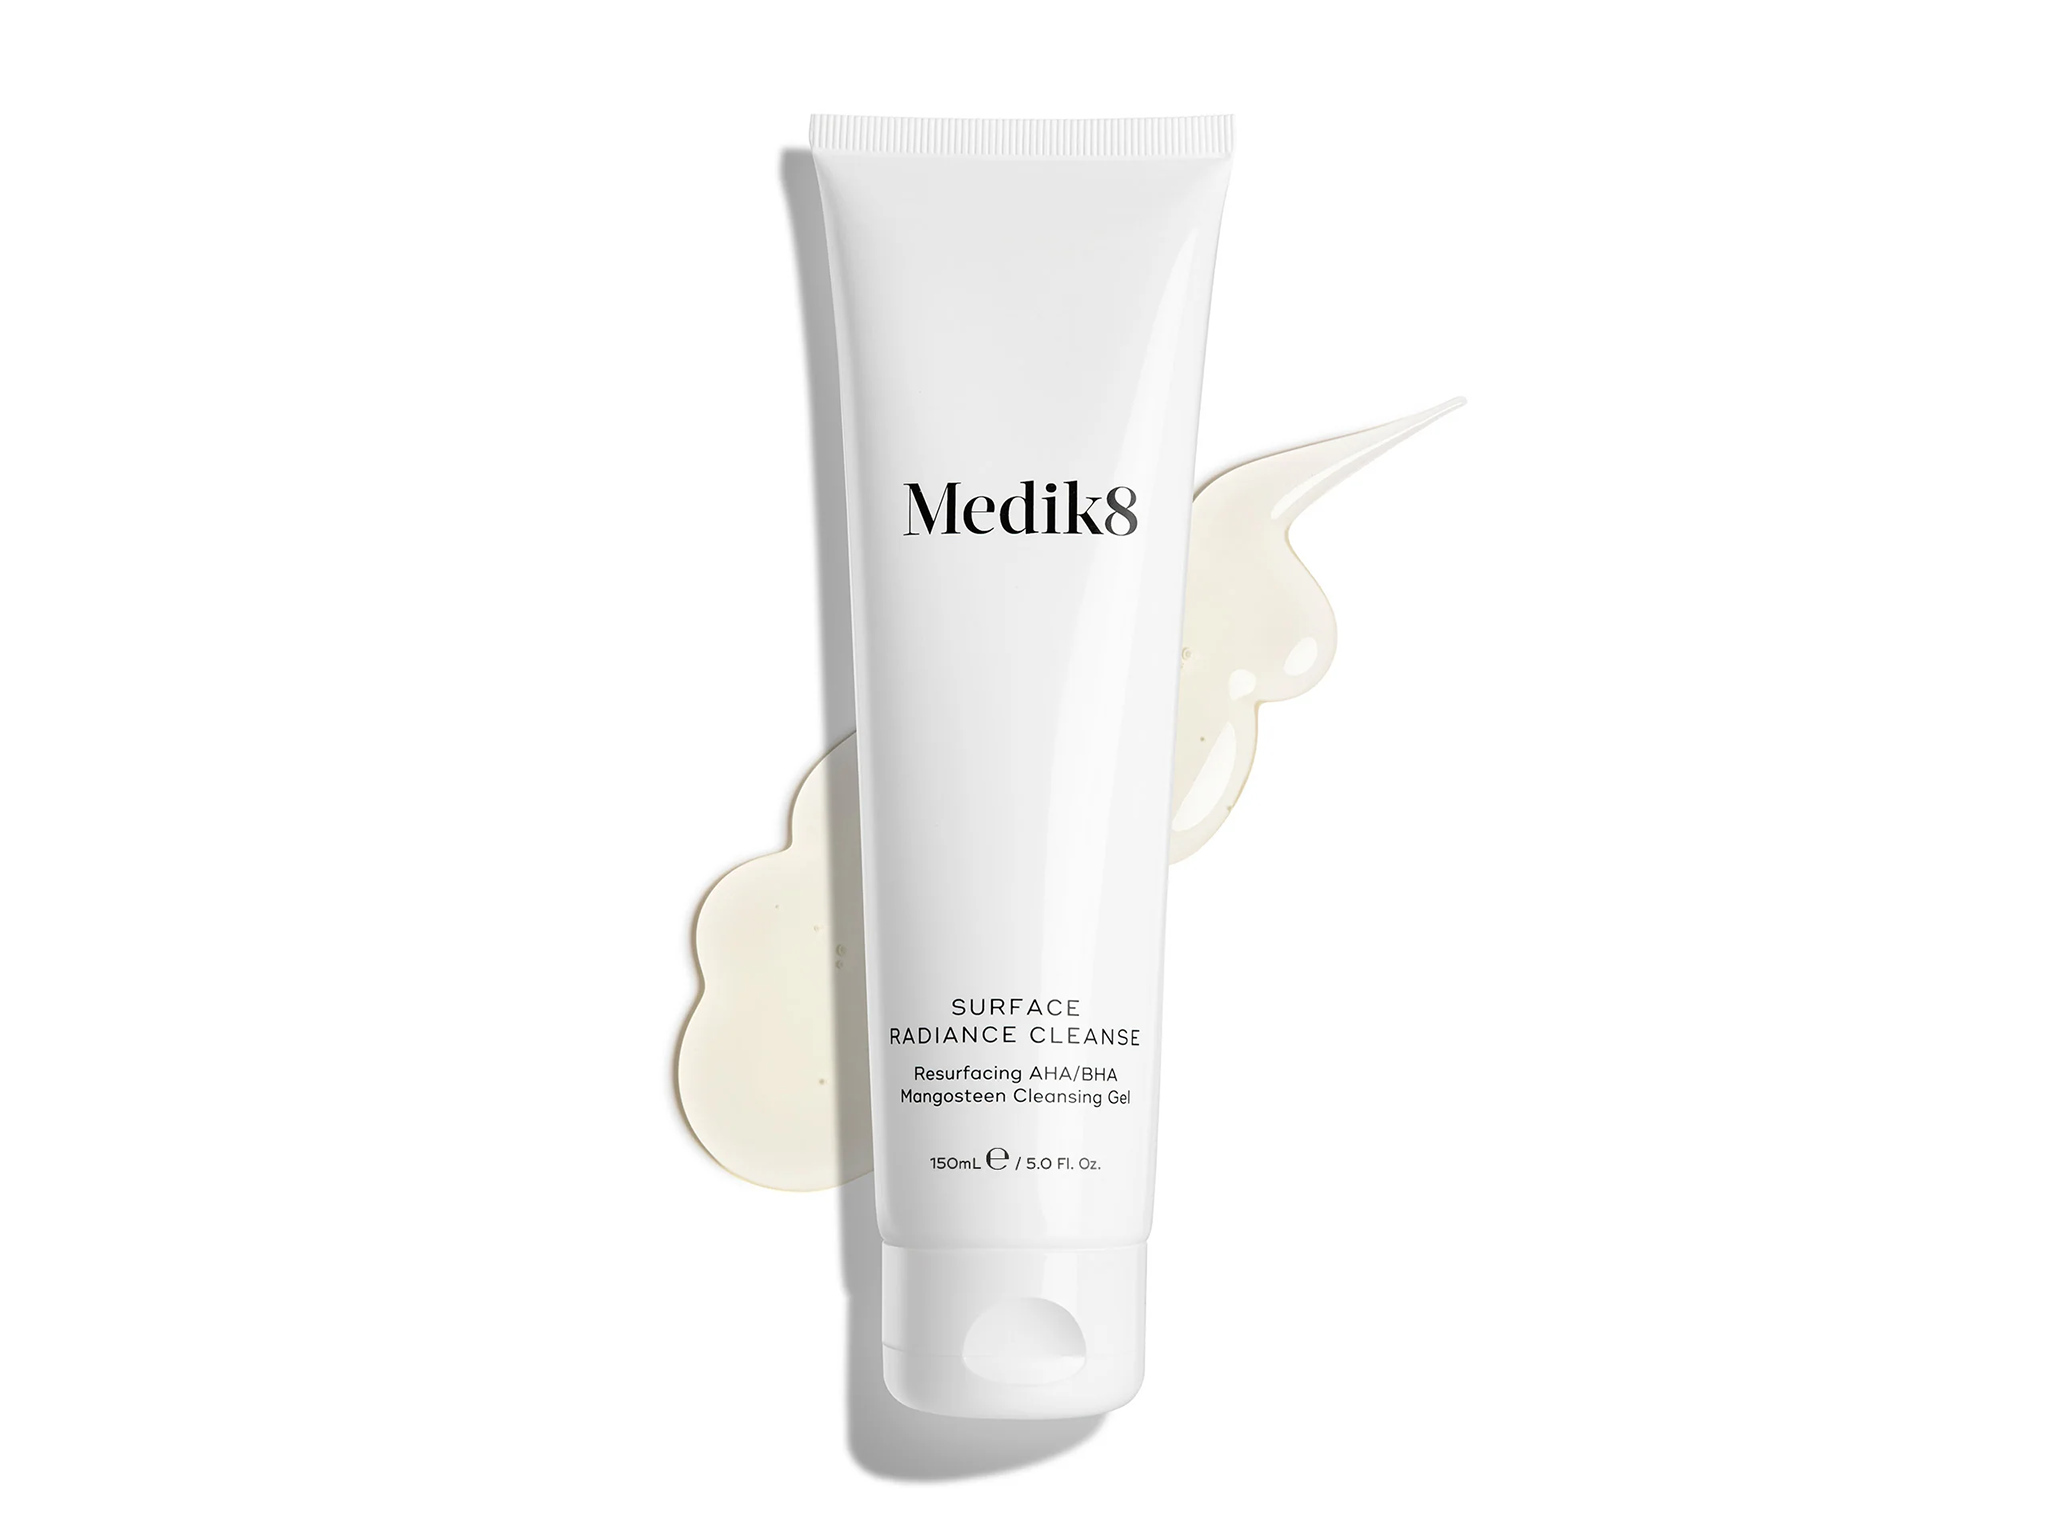 best Medik8 products review tried and tested Medik8 surface radiance cleanse